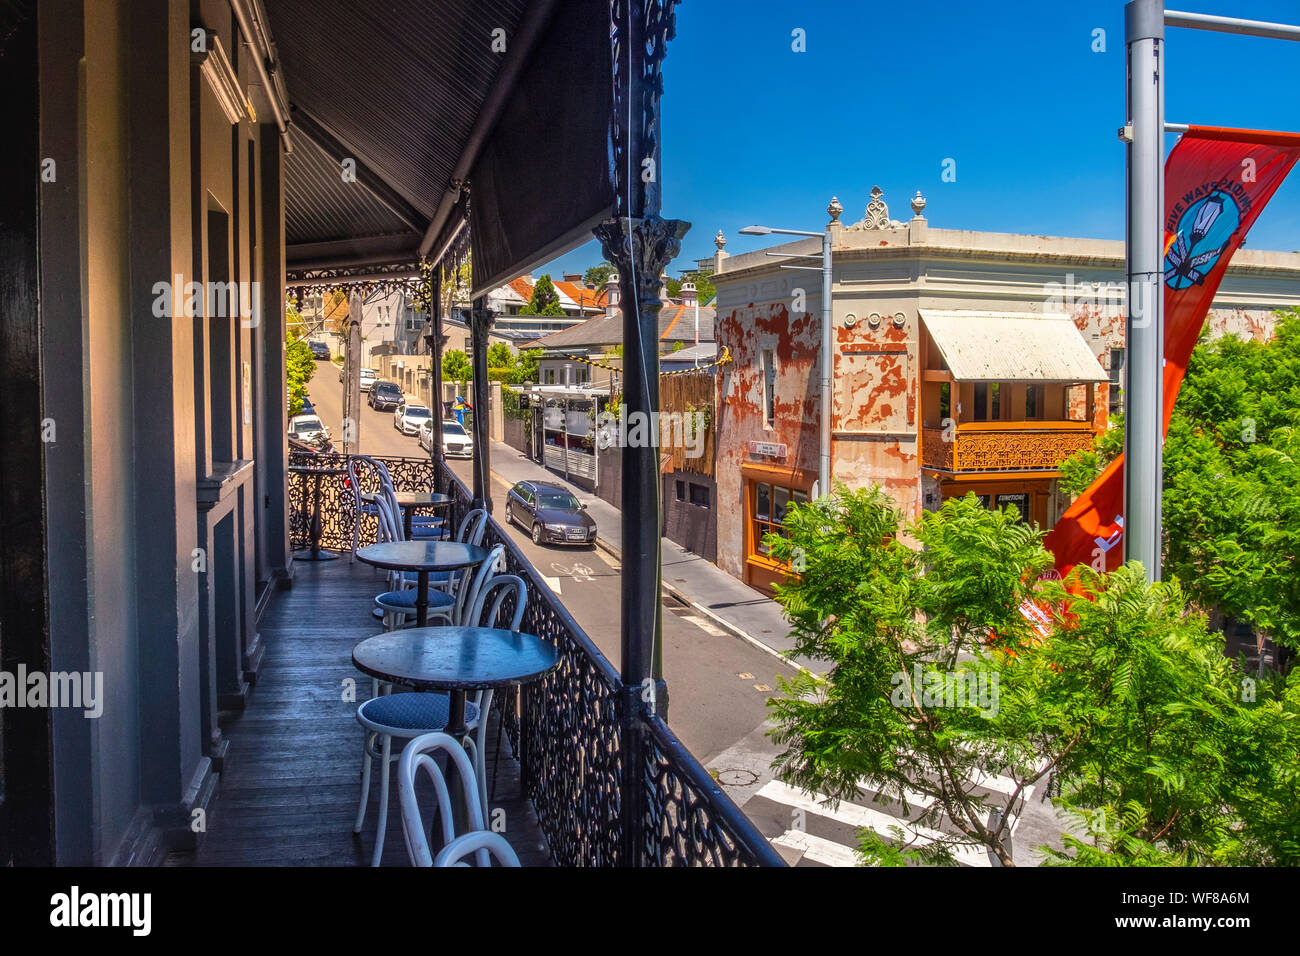 The Royal Hotel Paddington, Sydney, NSW, Australia. Polished hangout with a ground-floor pub, upstairs restaurant and a rooftop bar with city views. Stock Photo